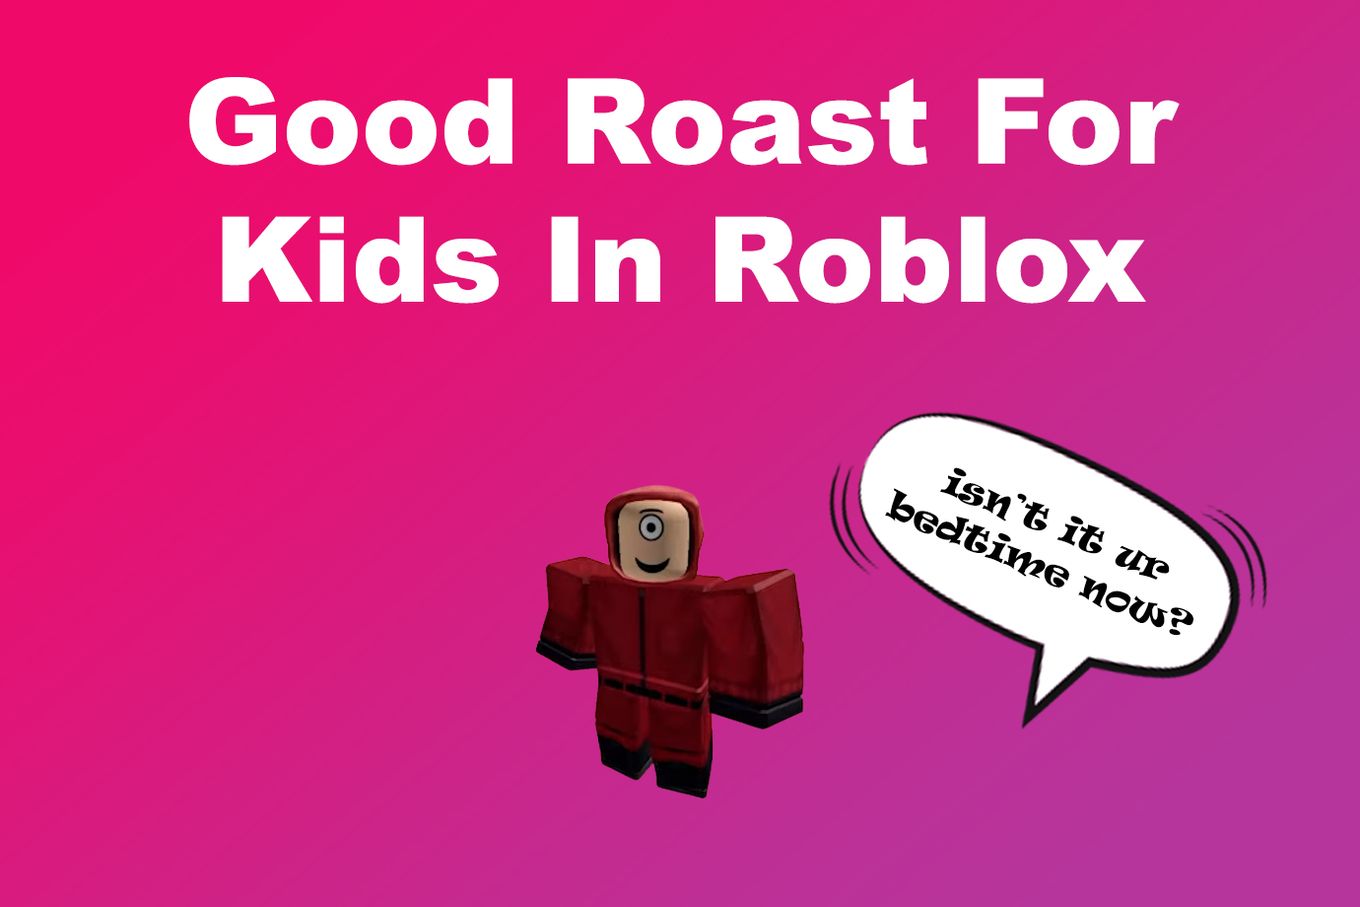 Good Roast For Kids In Roblox